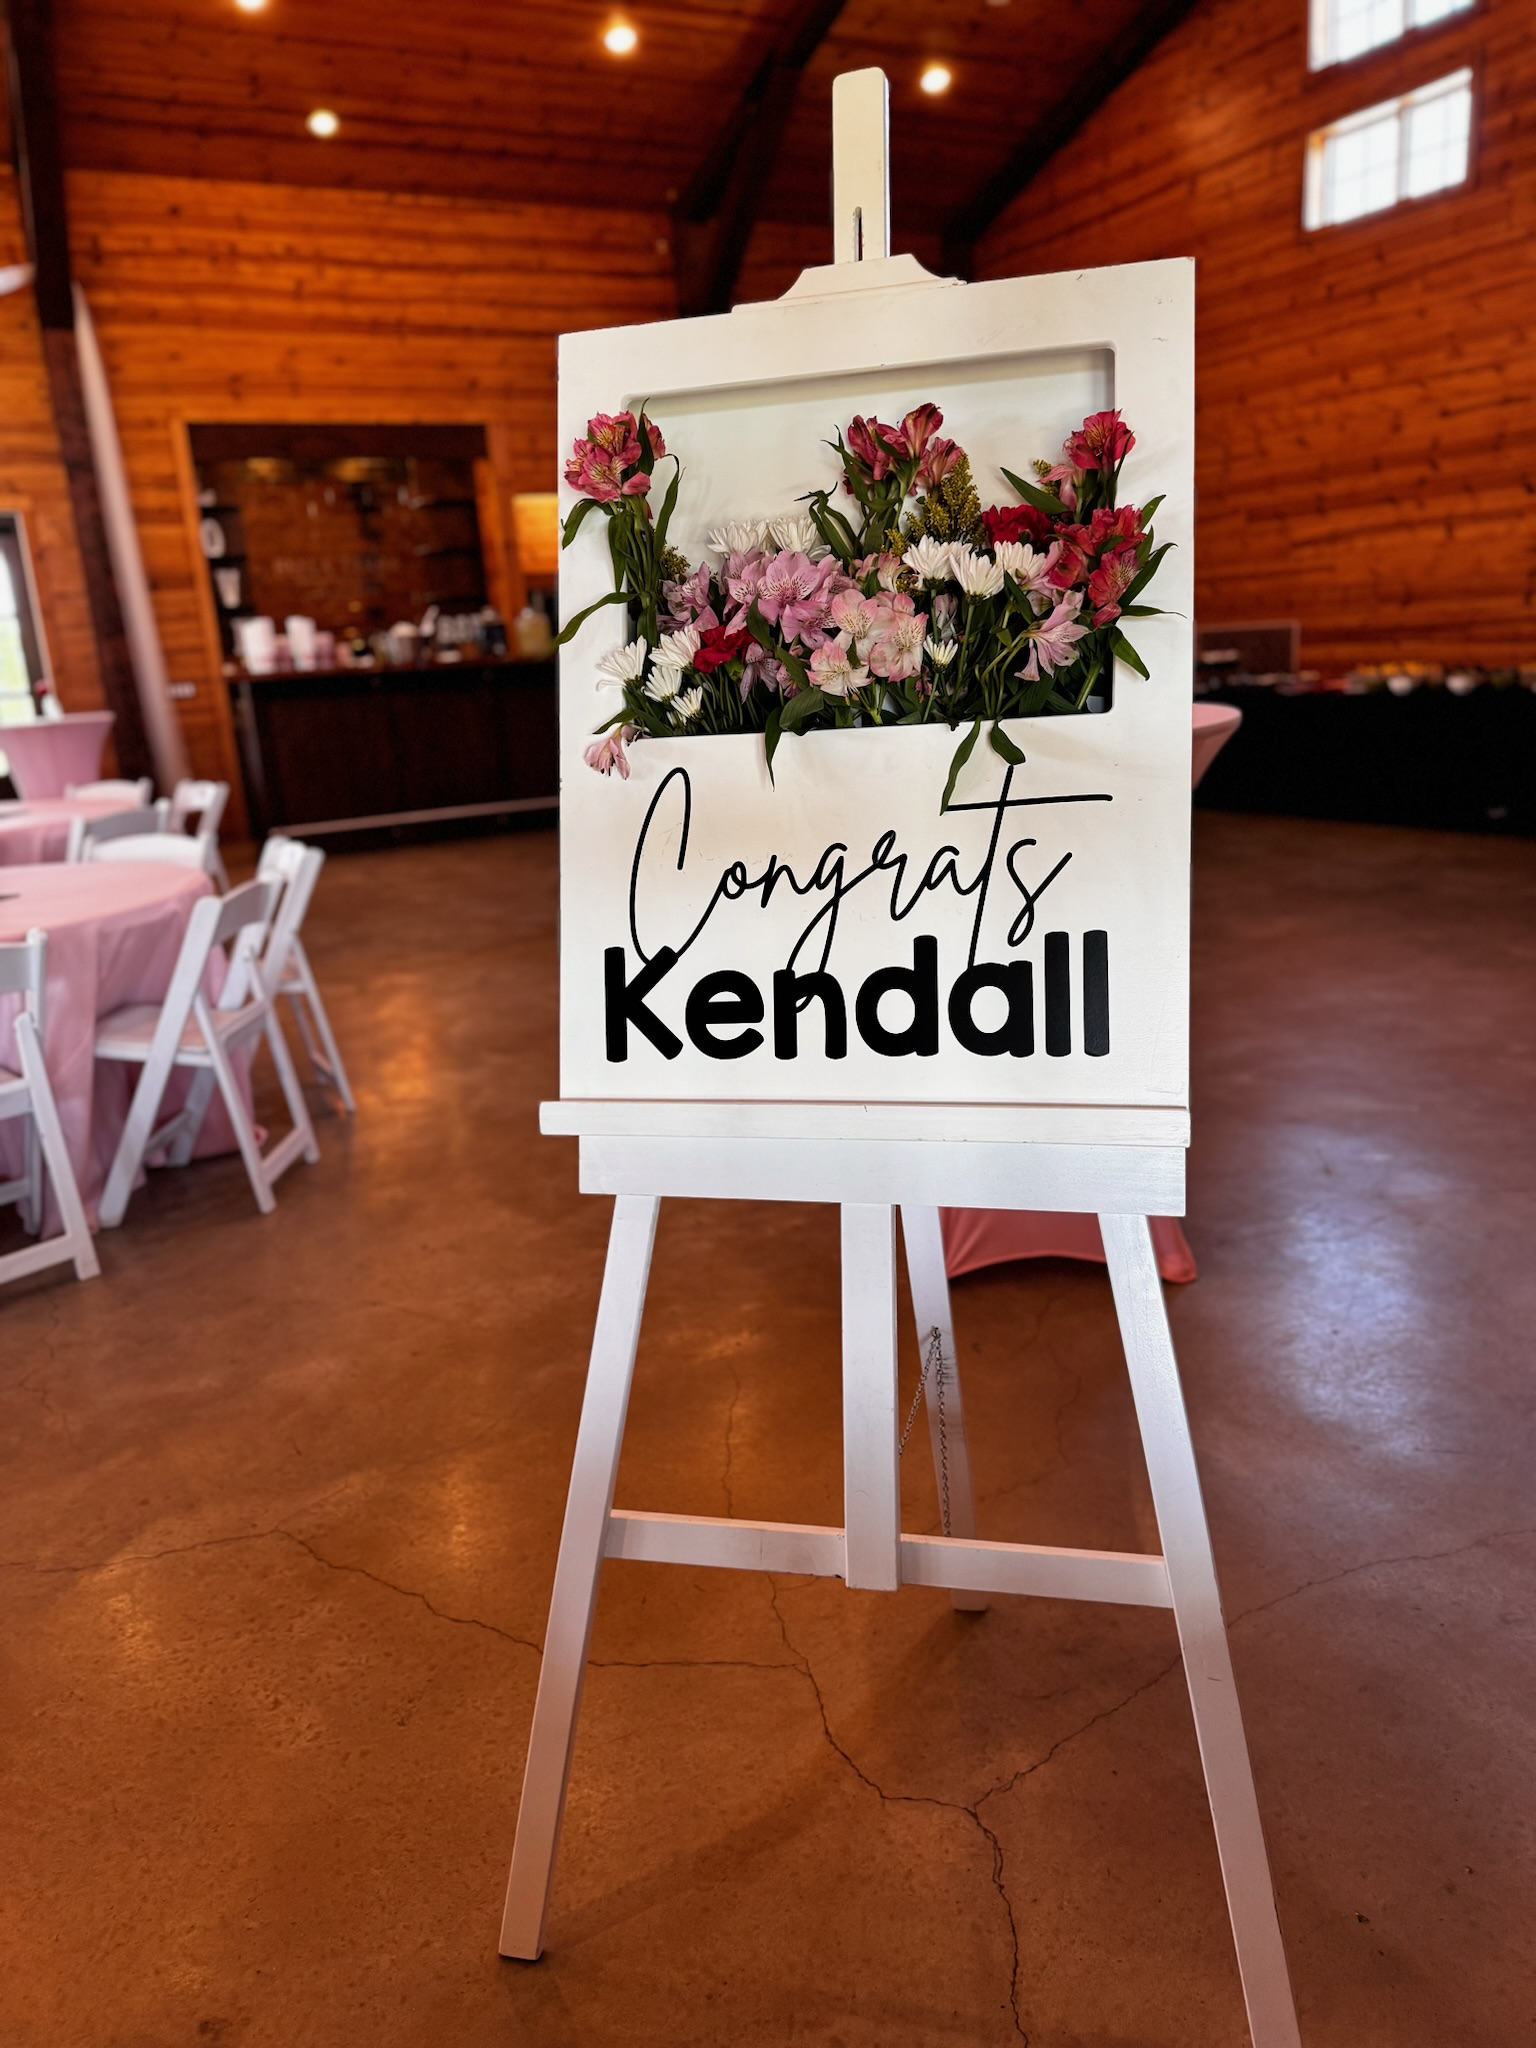 Customized "Congrats, Kendall" sign with live flowers coming out of the sign.